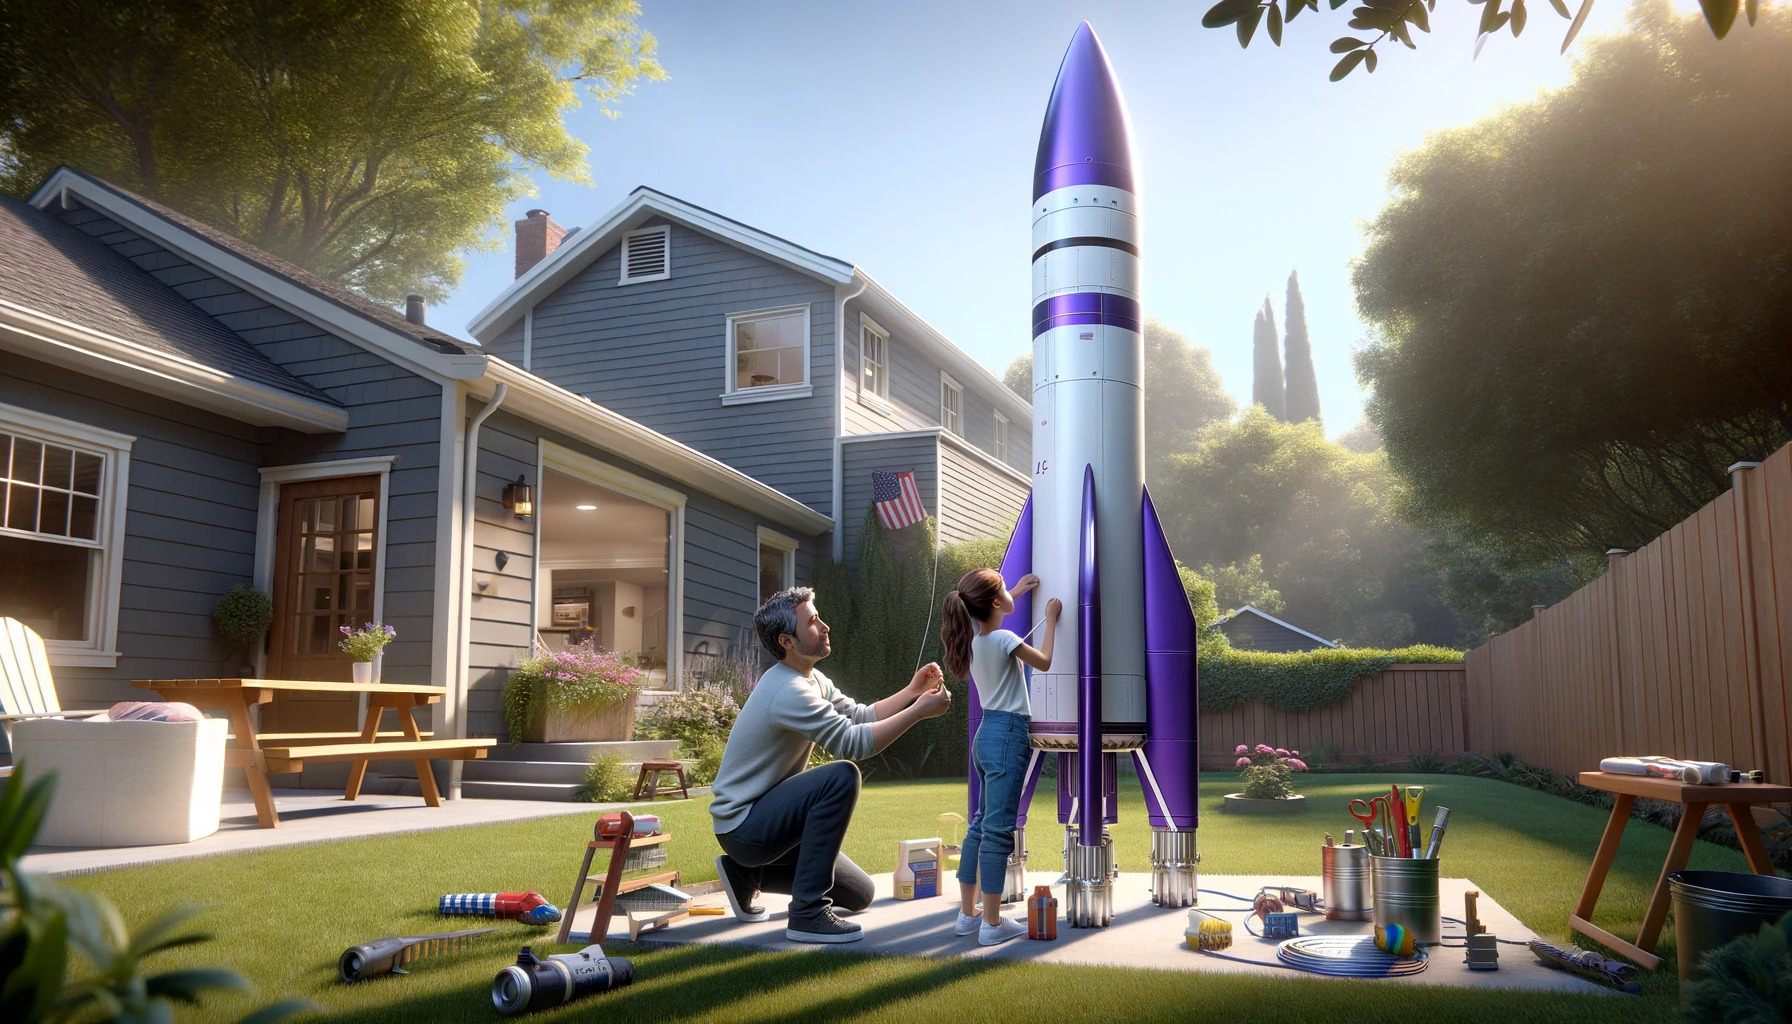 A father and a daughter build a full-sized rocket in their suburban backyard